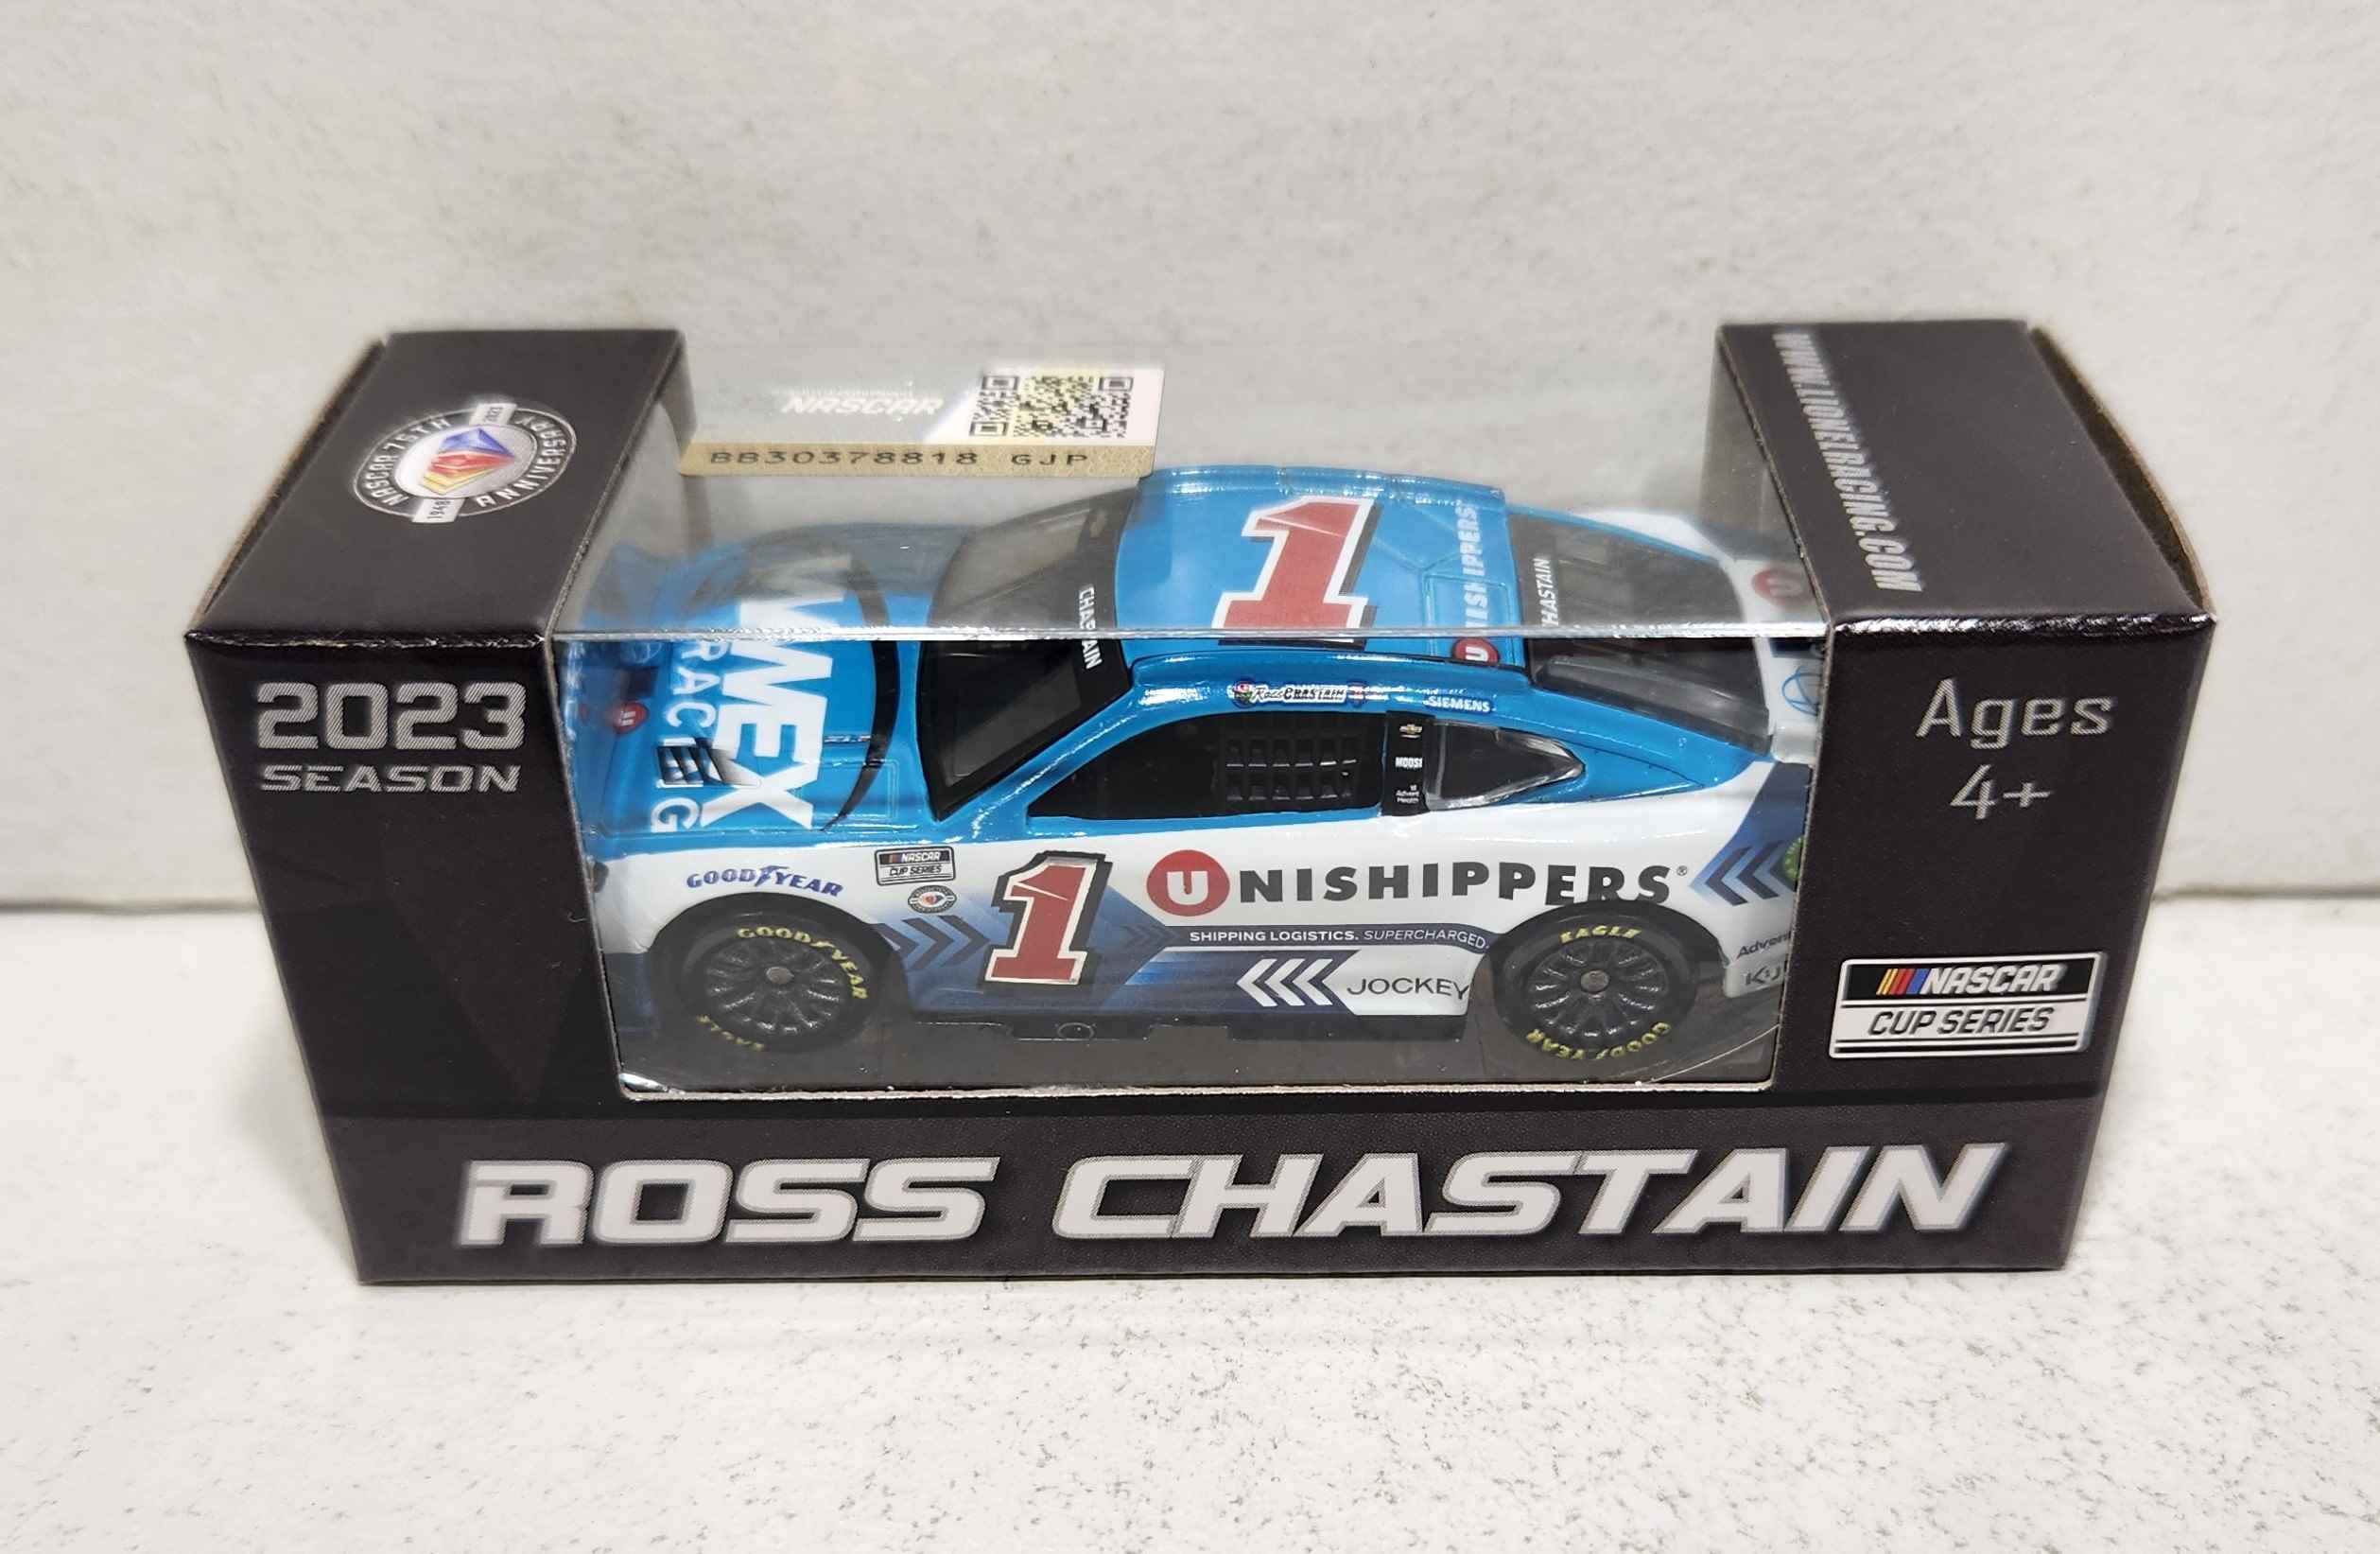 2023 Ross Chastain 1/64th Unishippers Camaro